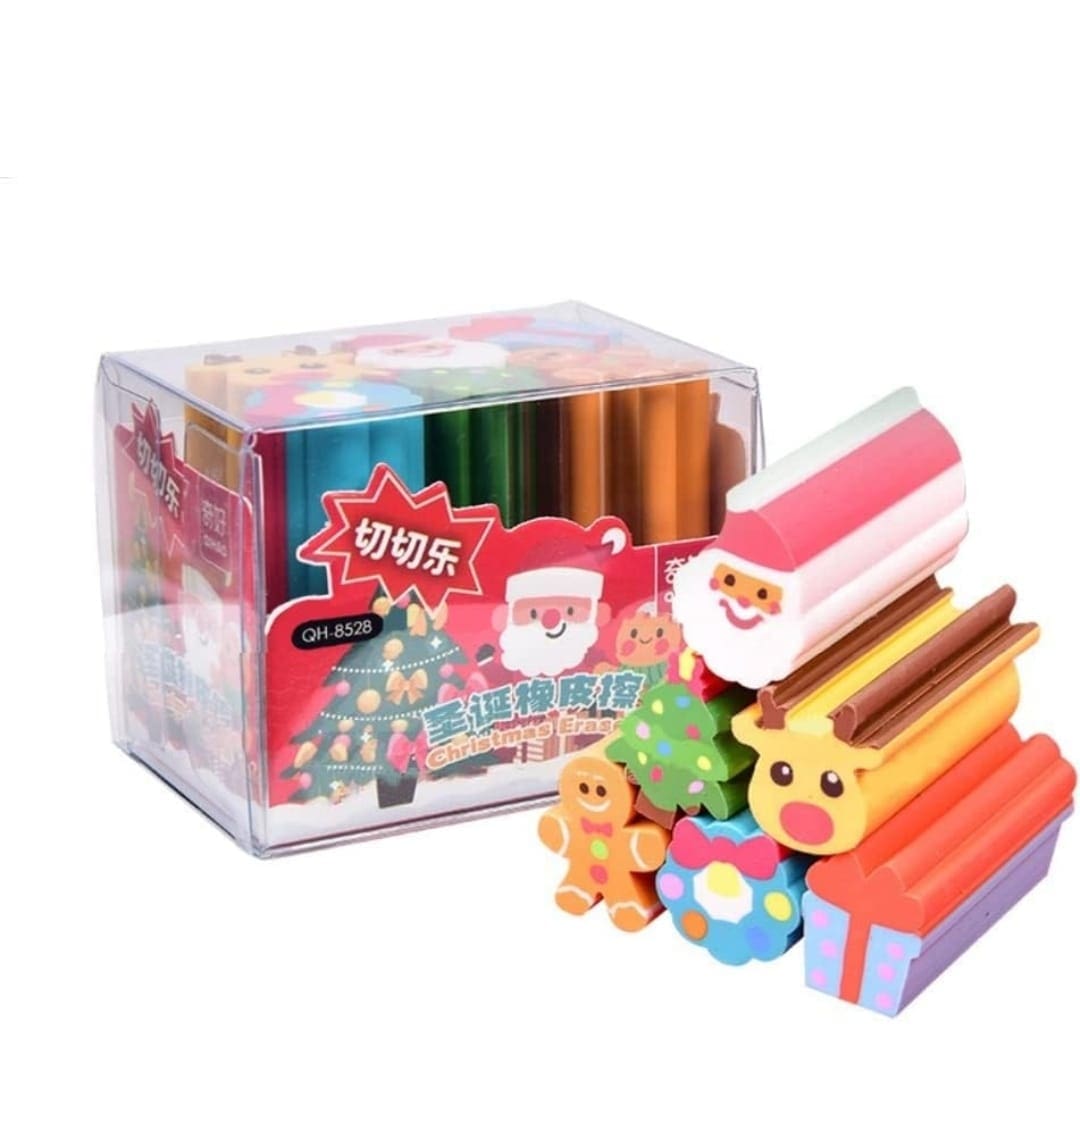 Bright International Erasers & Sharpeners Christmas Pack of 6 Cute Erasers for Kids - Perfect for Return Gifts and School Fun